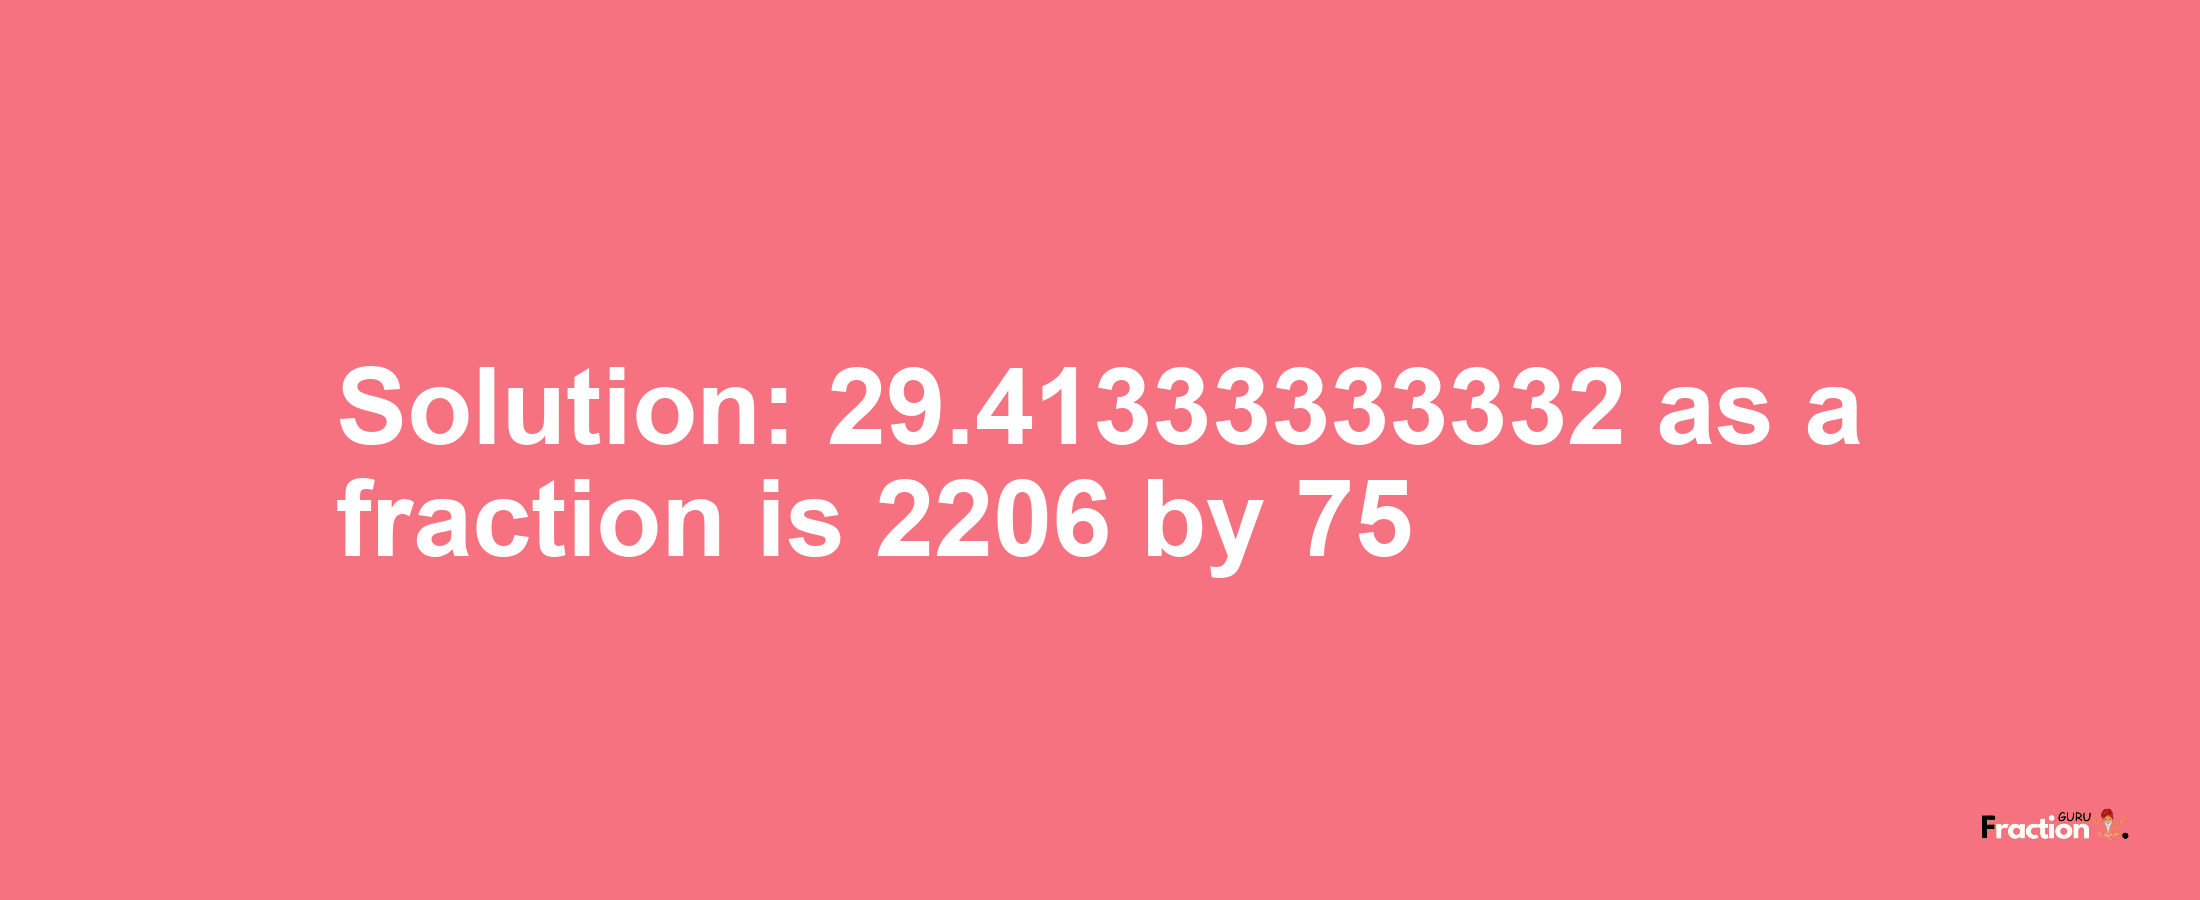 Solution:29.41333333332 as a fraction is 2206/75